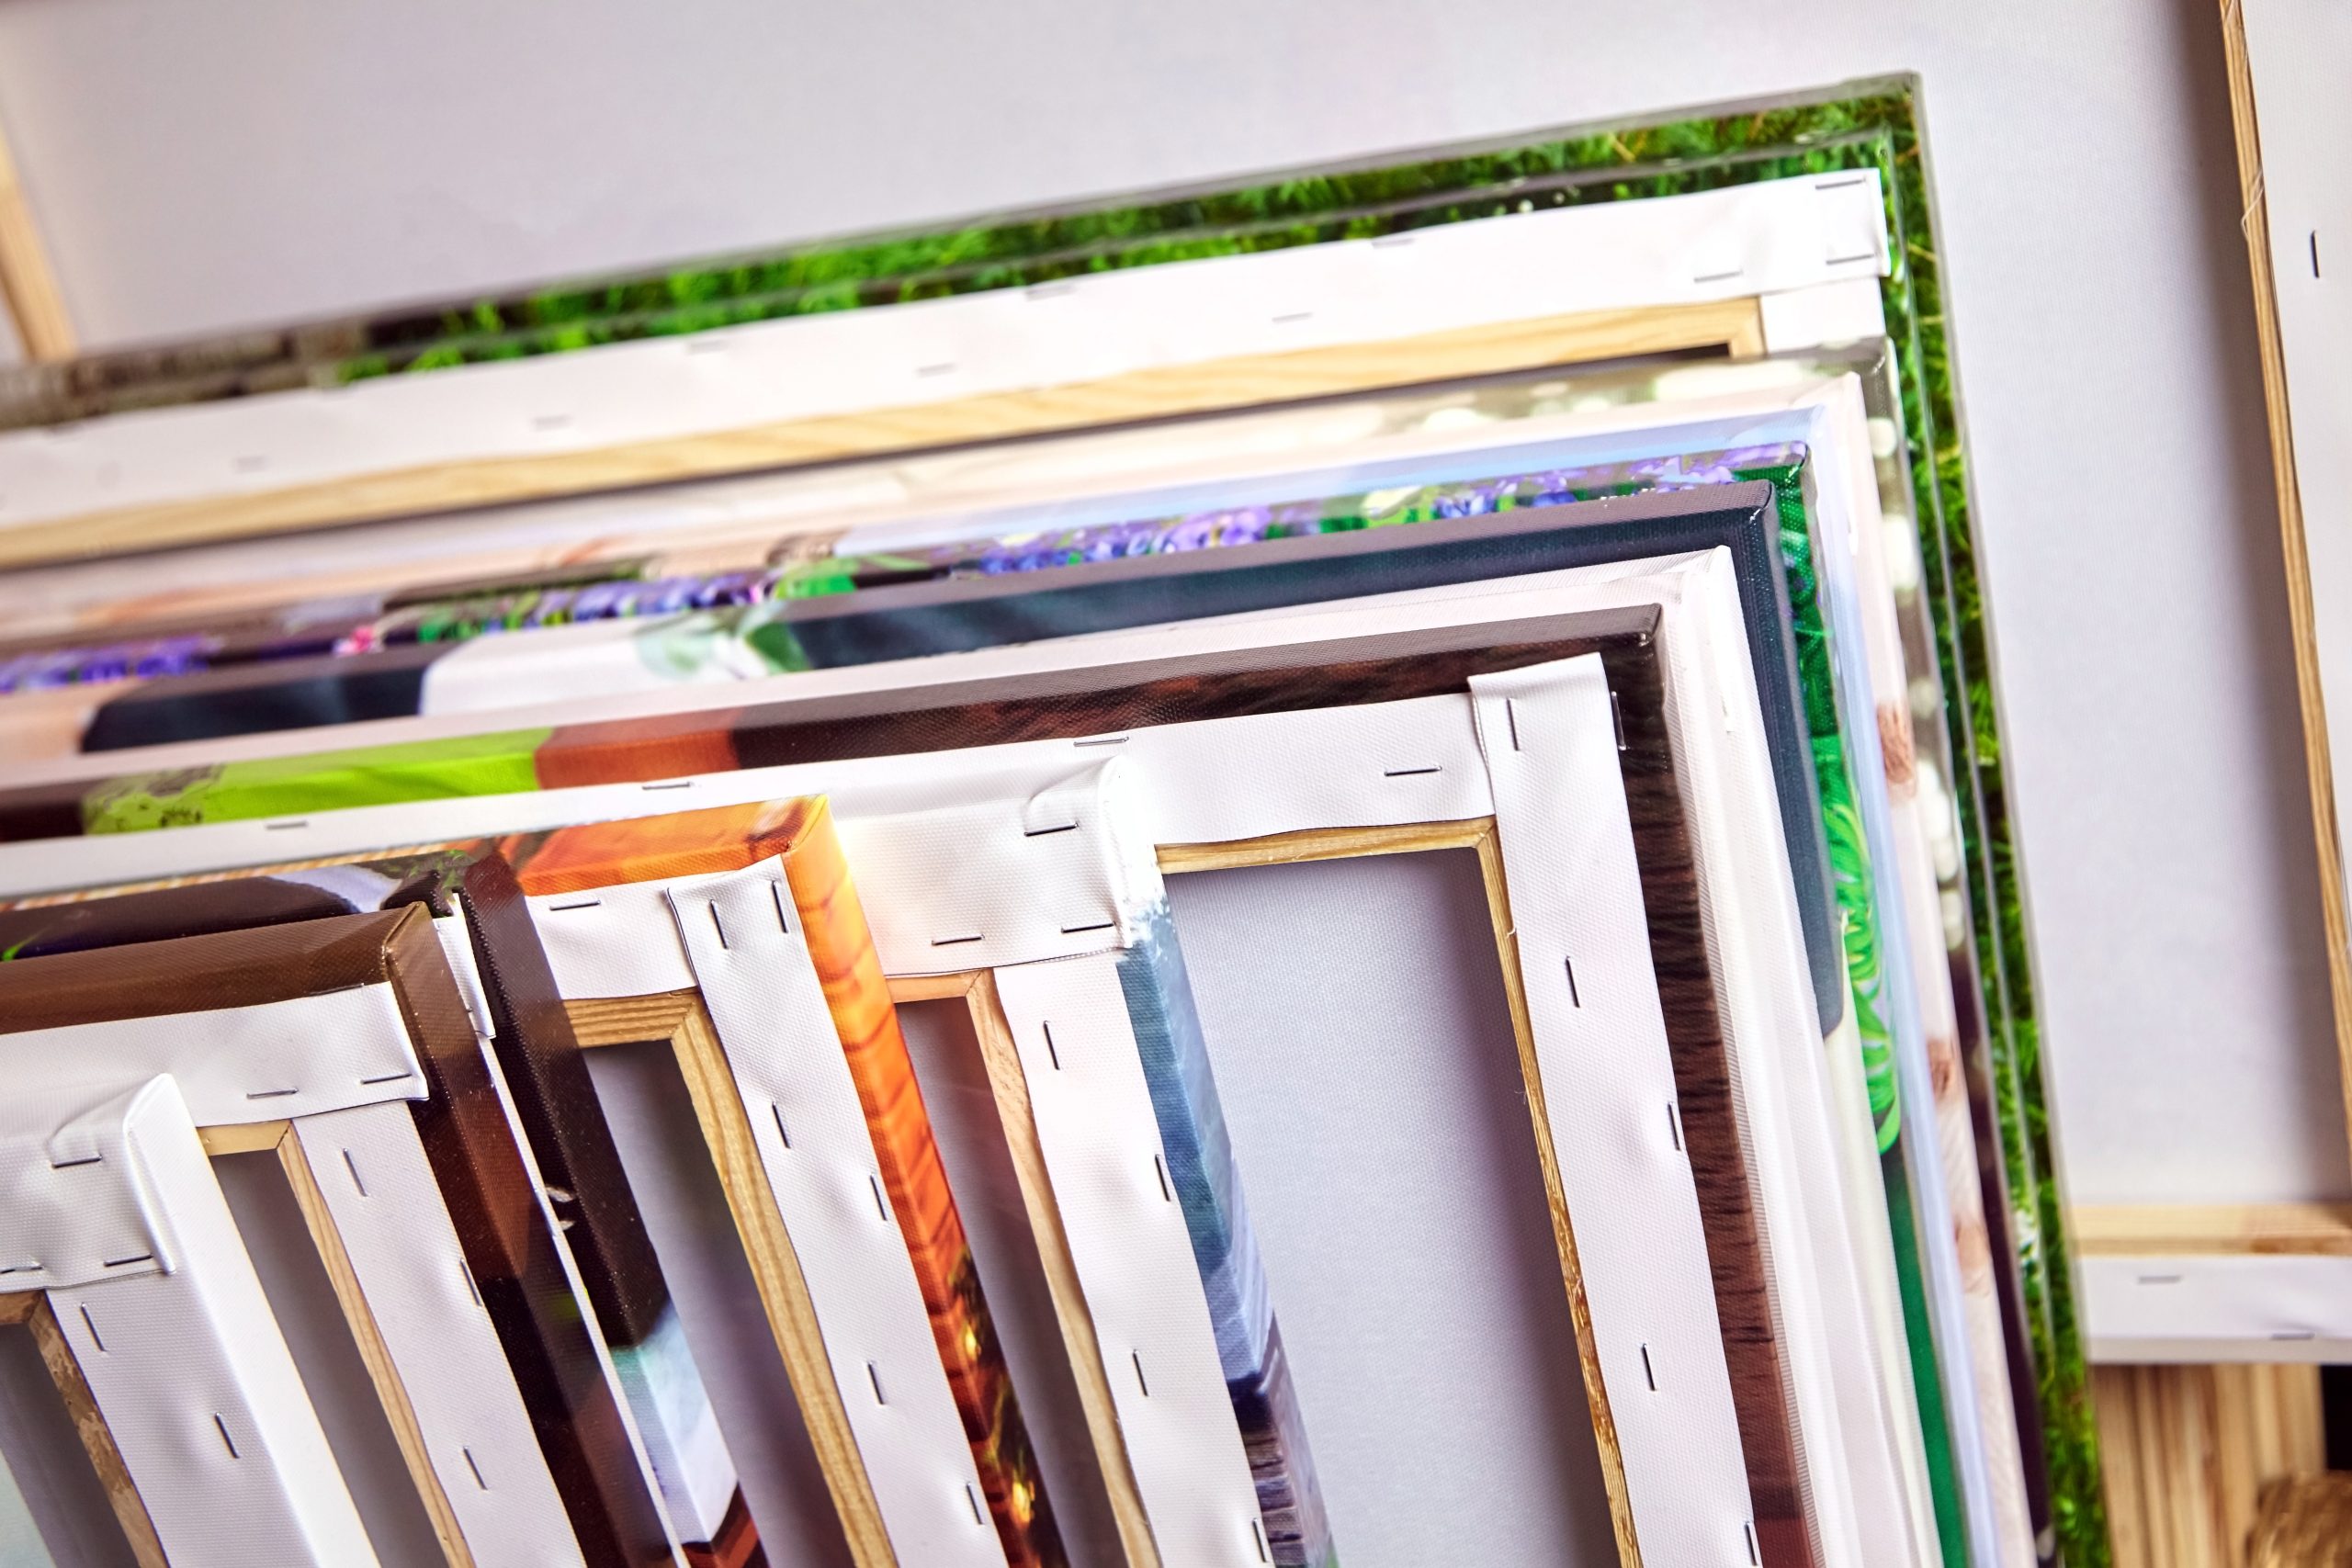 Canvas Art Storage Solutions to Any Situation